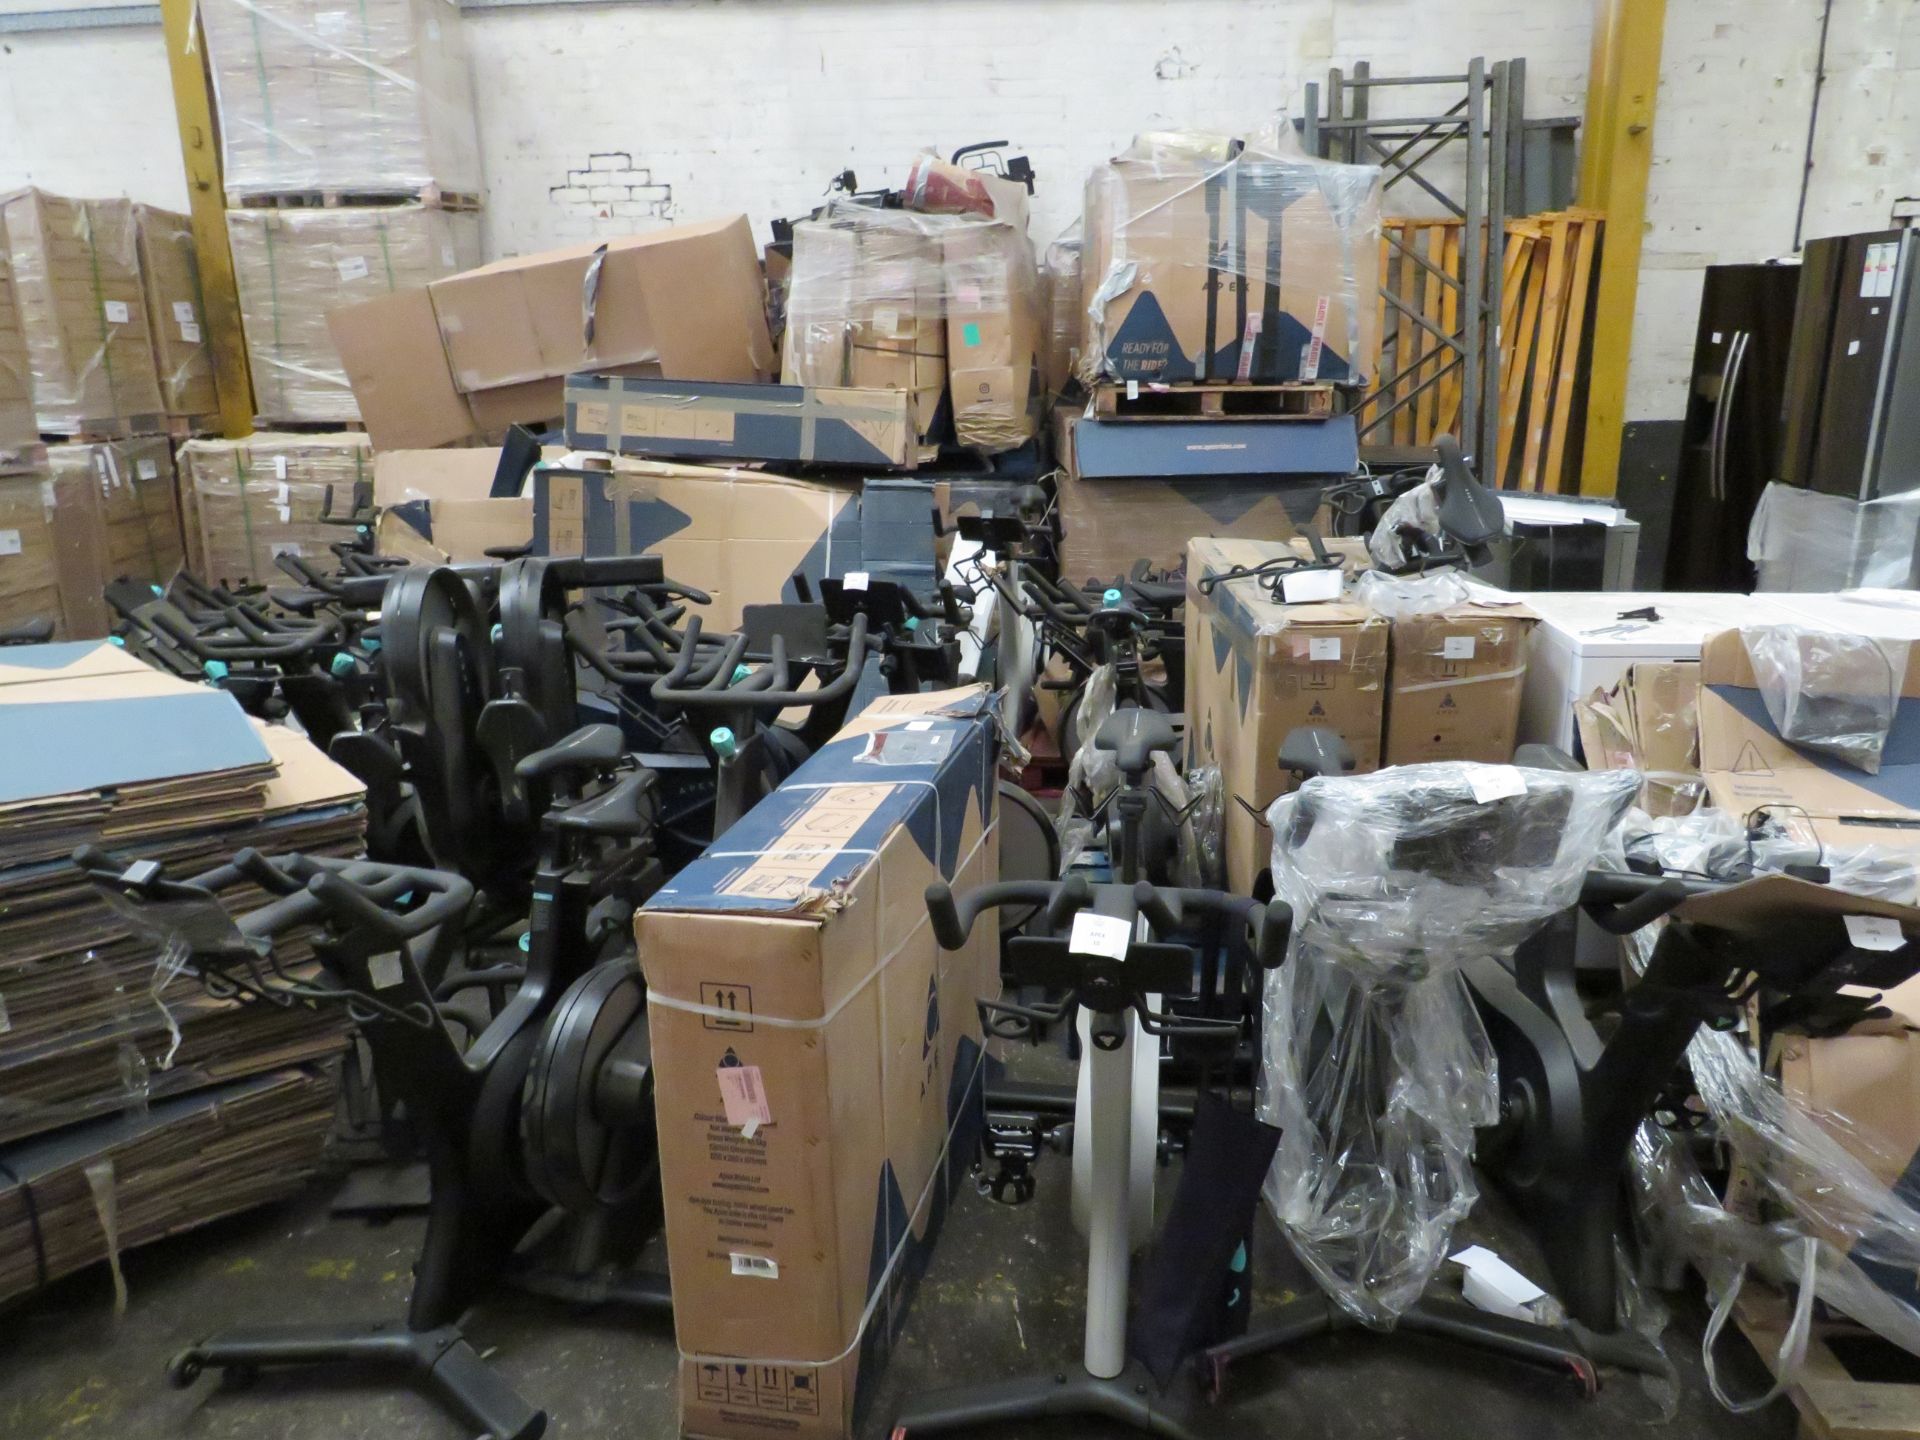 Job lot of approx 79 The Apex bikes and 2 crates of parts, some are complete, some have boxes but - Image 13 of 18